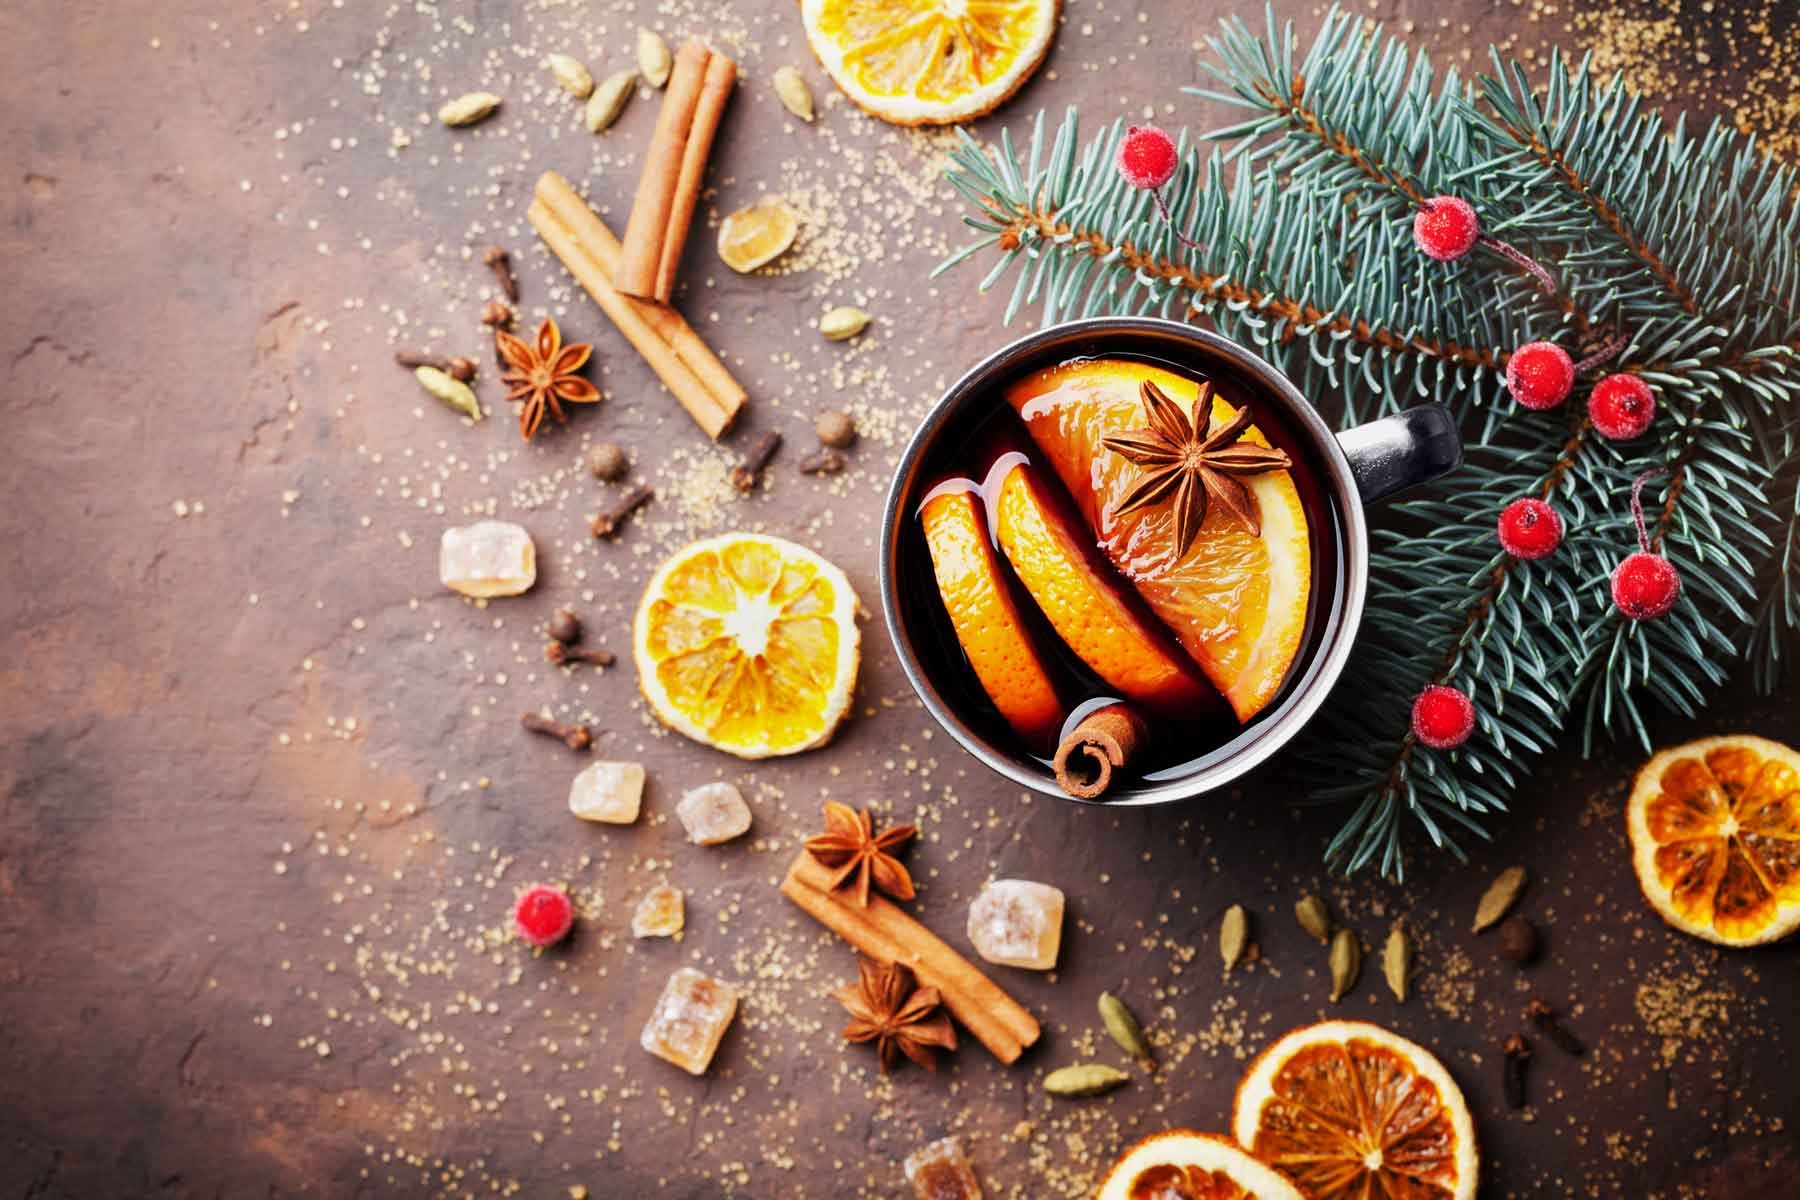 Spices, Sauces & Seasonings That Make Any Meal Festive